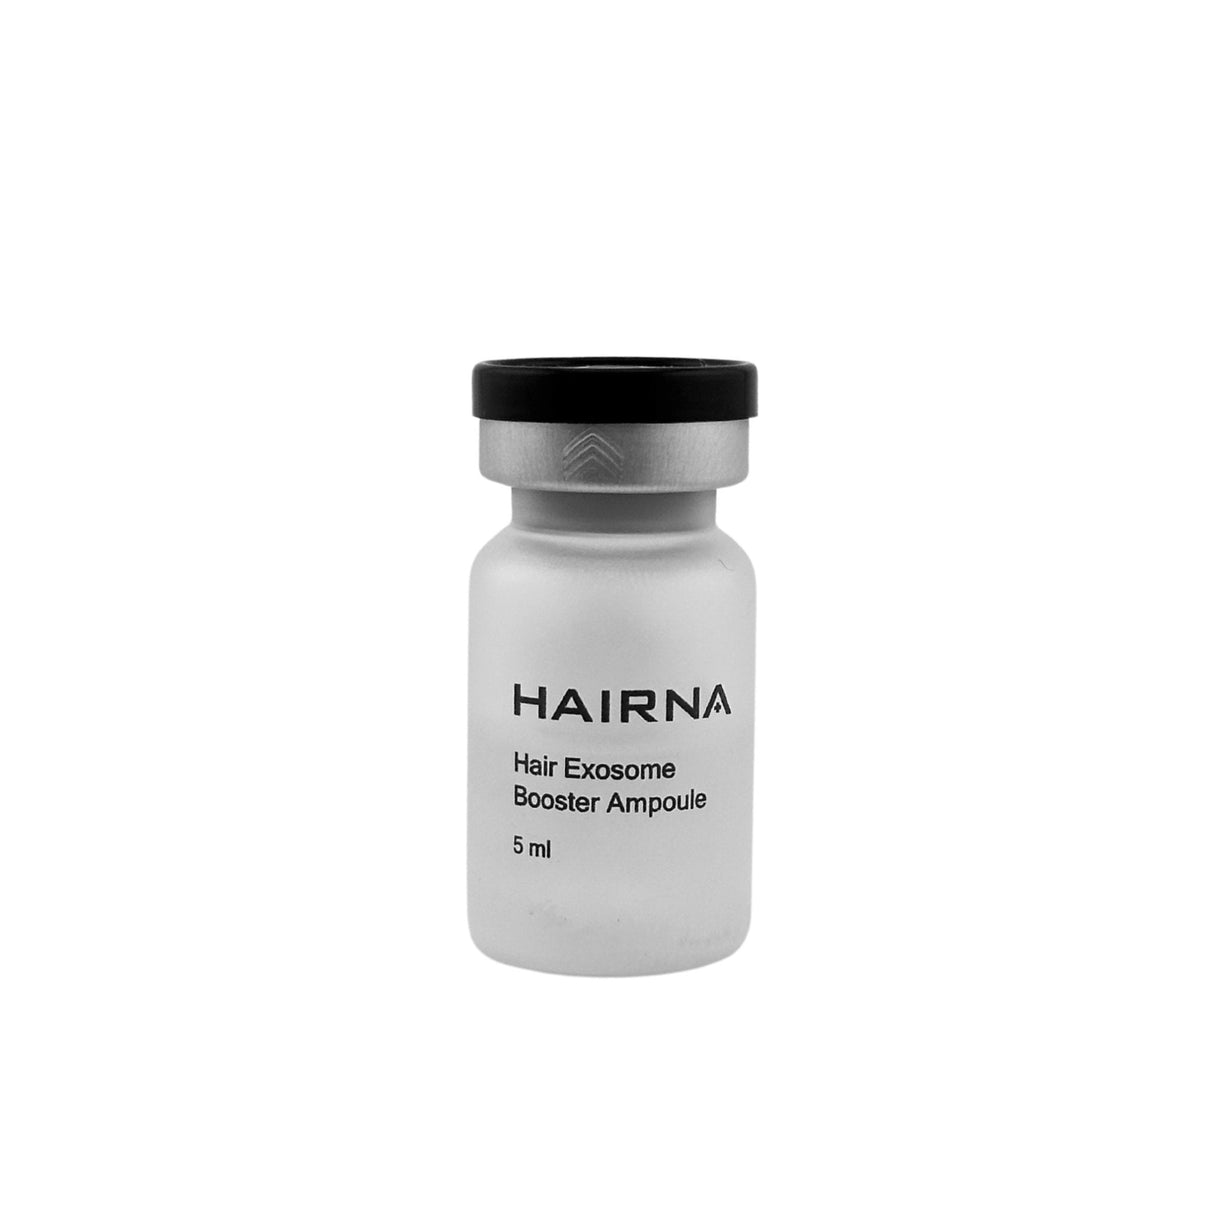 Hair Booster Ampoule - Filler Lux™ - Maypharm Co., Ltd.